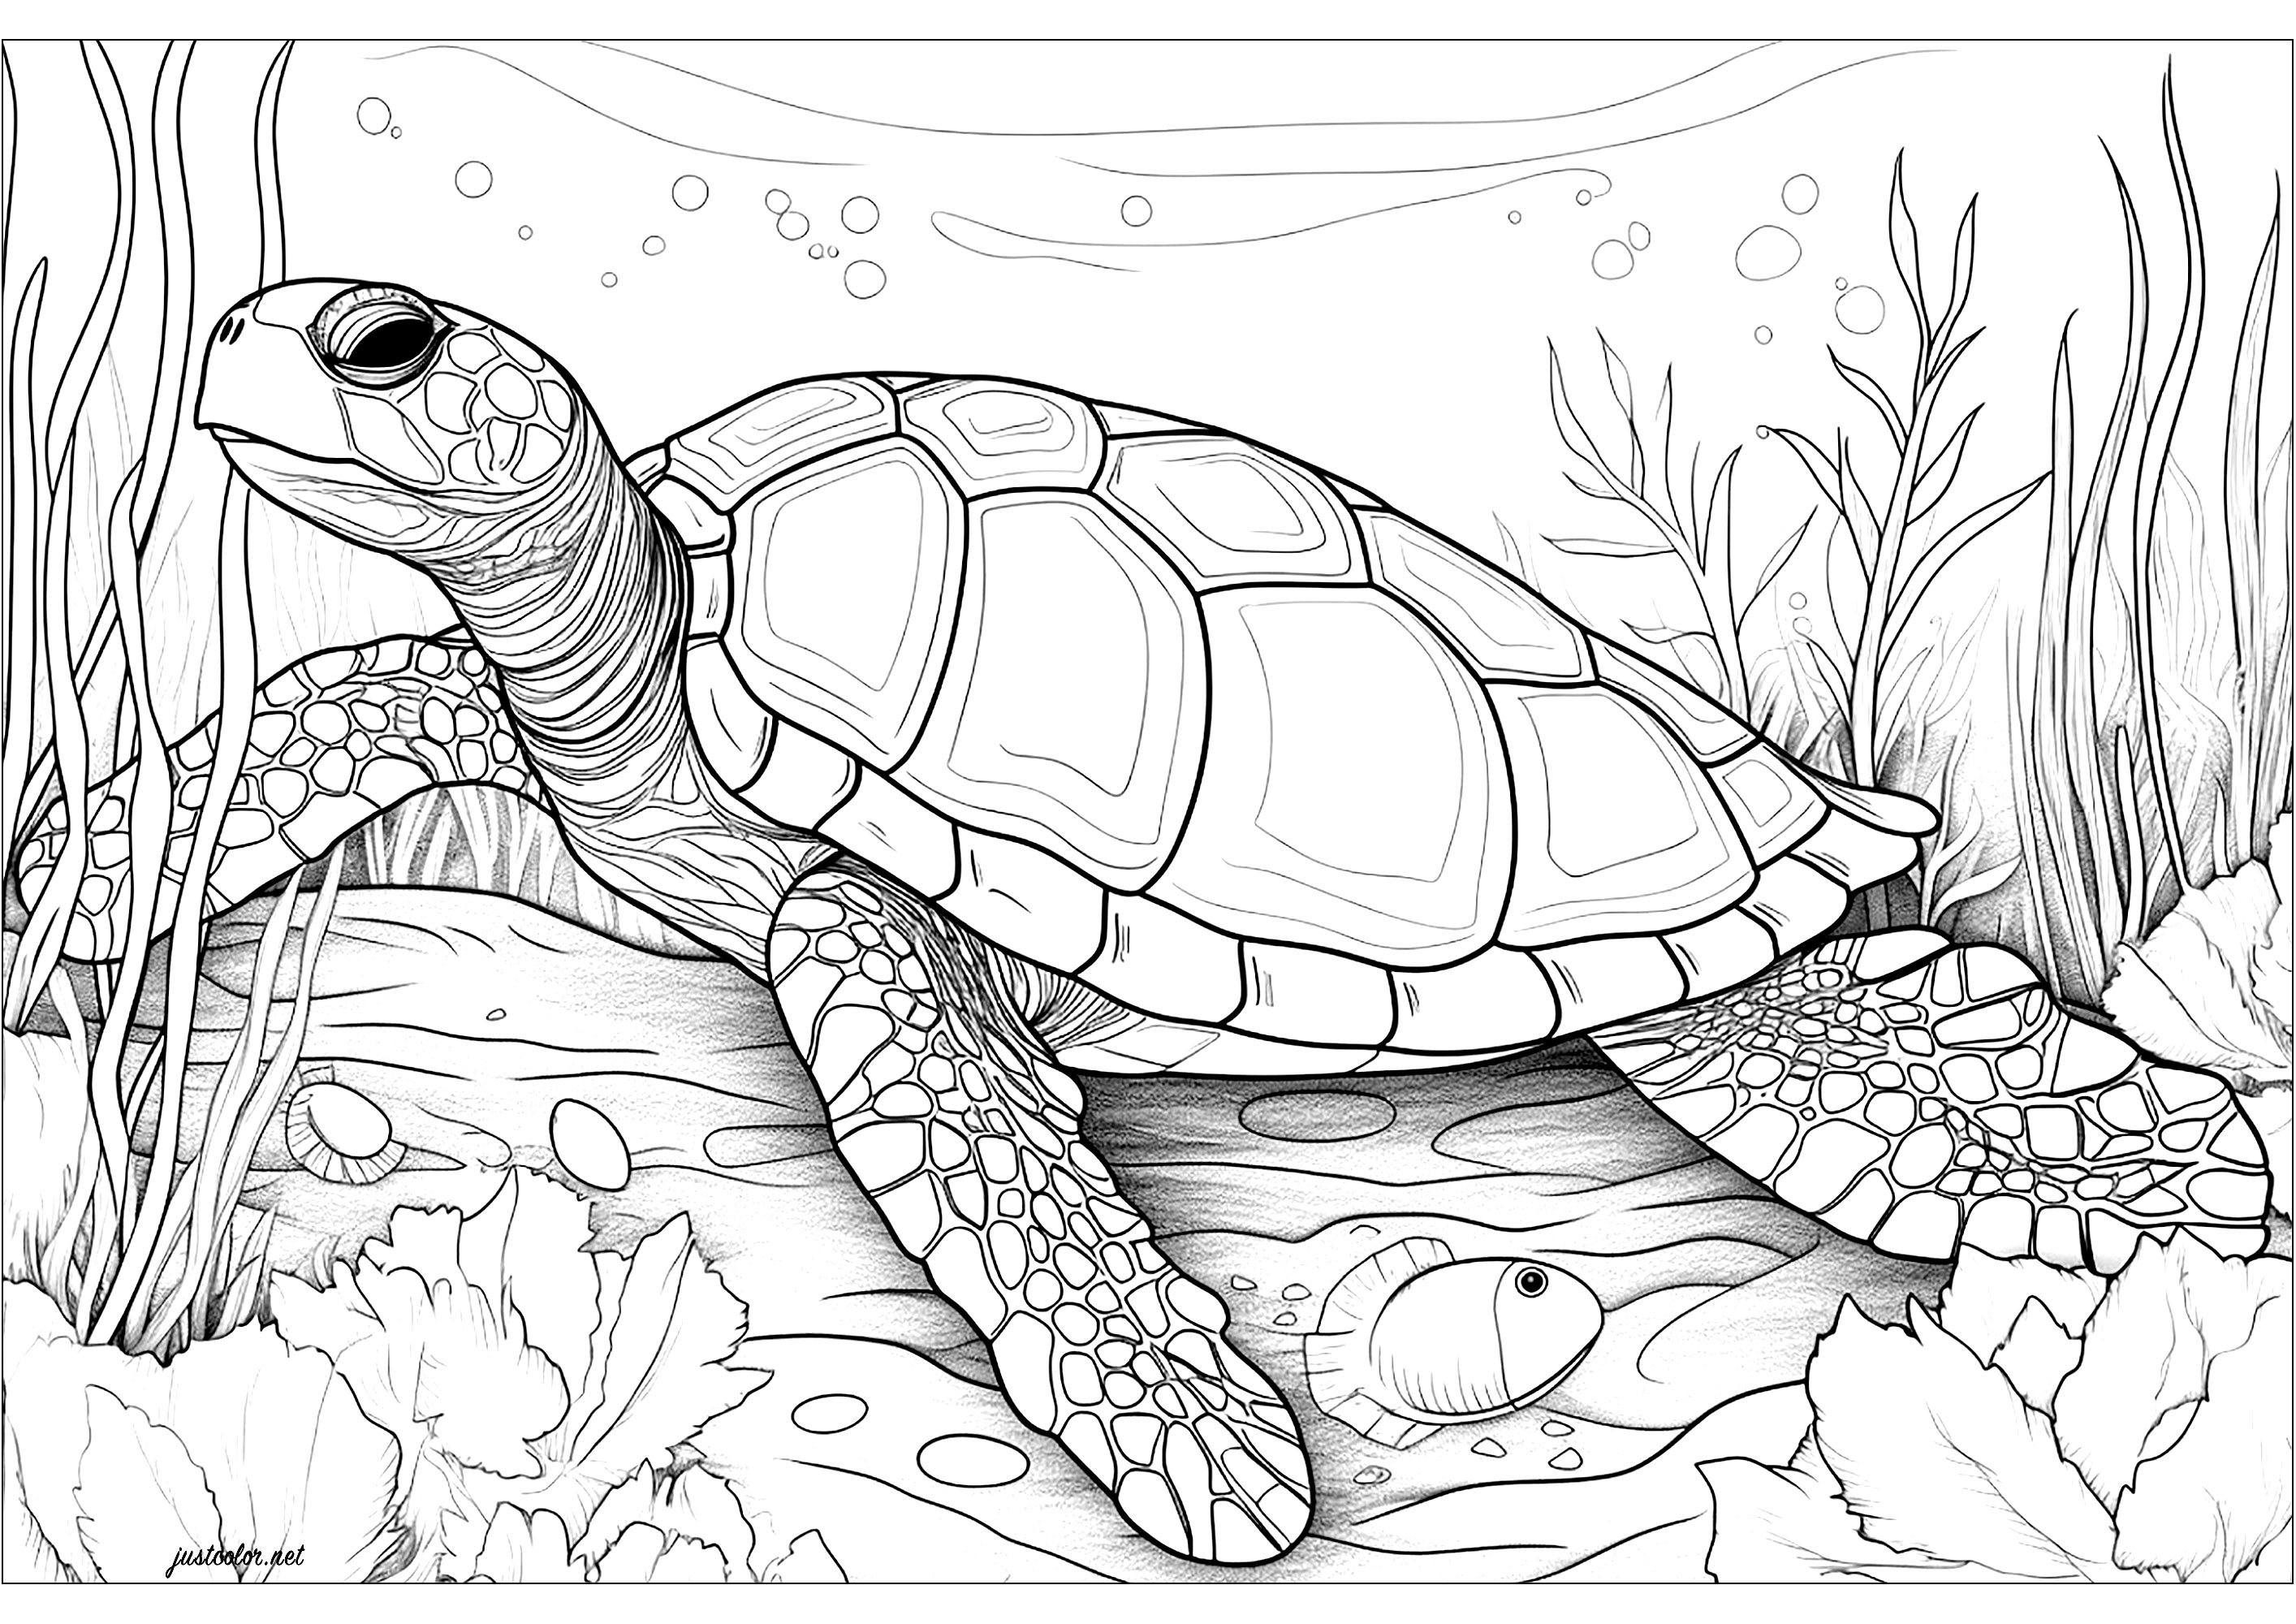 Large sea turtle. A very realistic sea turtle, it's up to you to color the details of its shell and scales. The background is filled with bubbles and aquatic vegetation, giving this coloring page a calm and serene atmosphere.